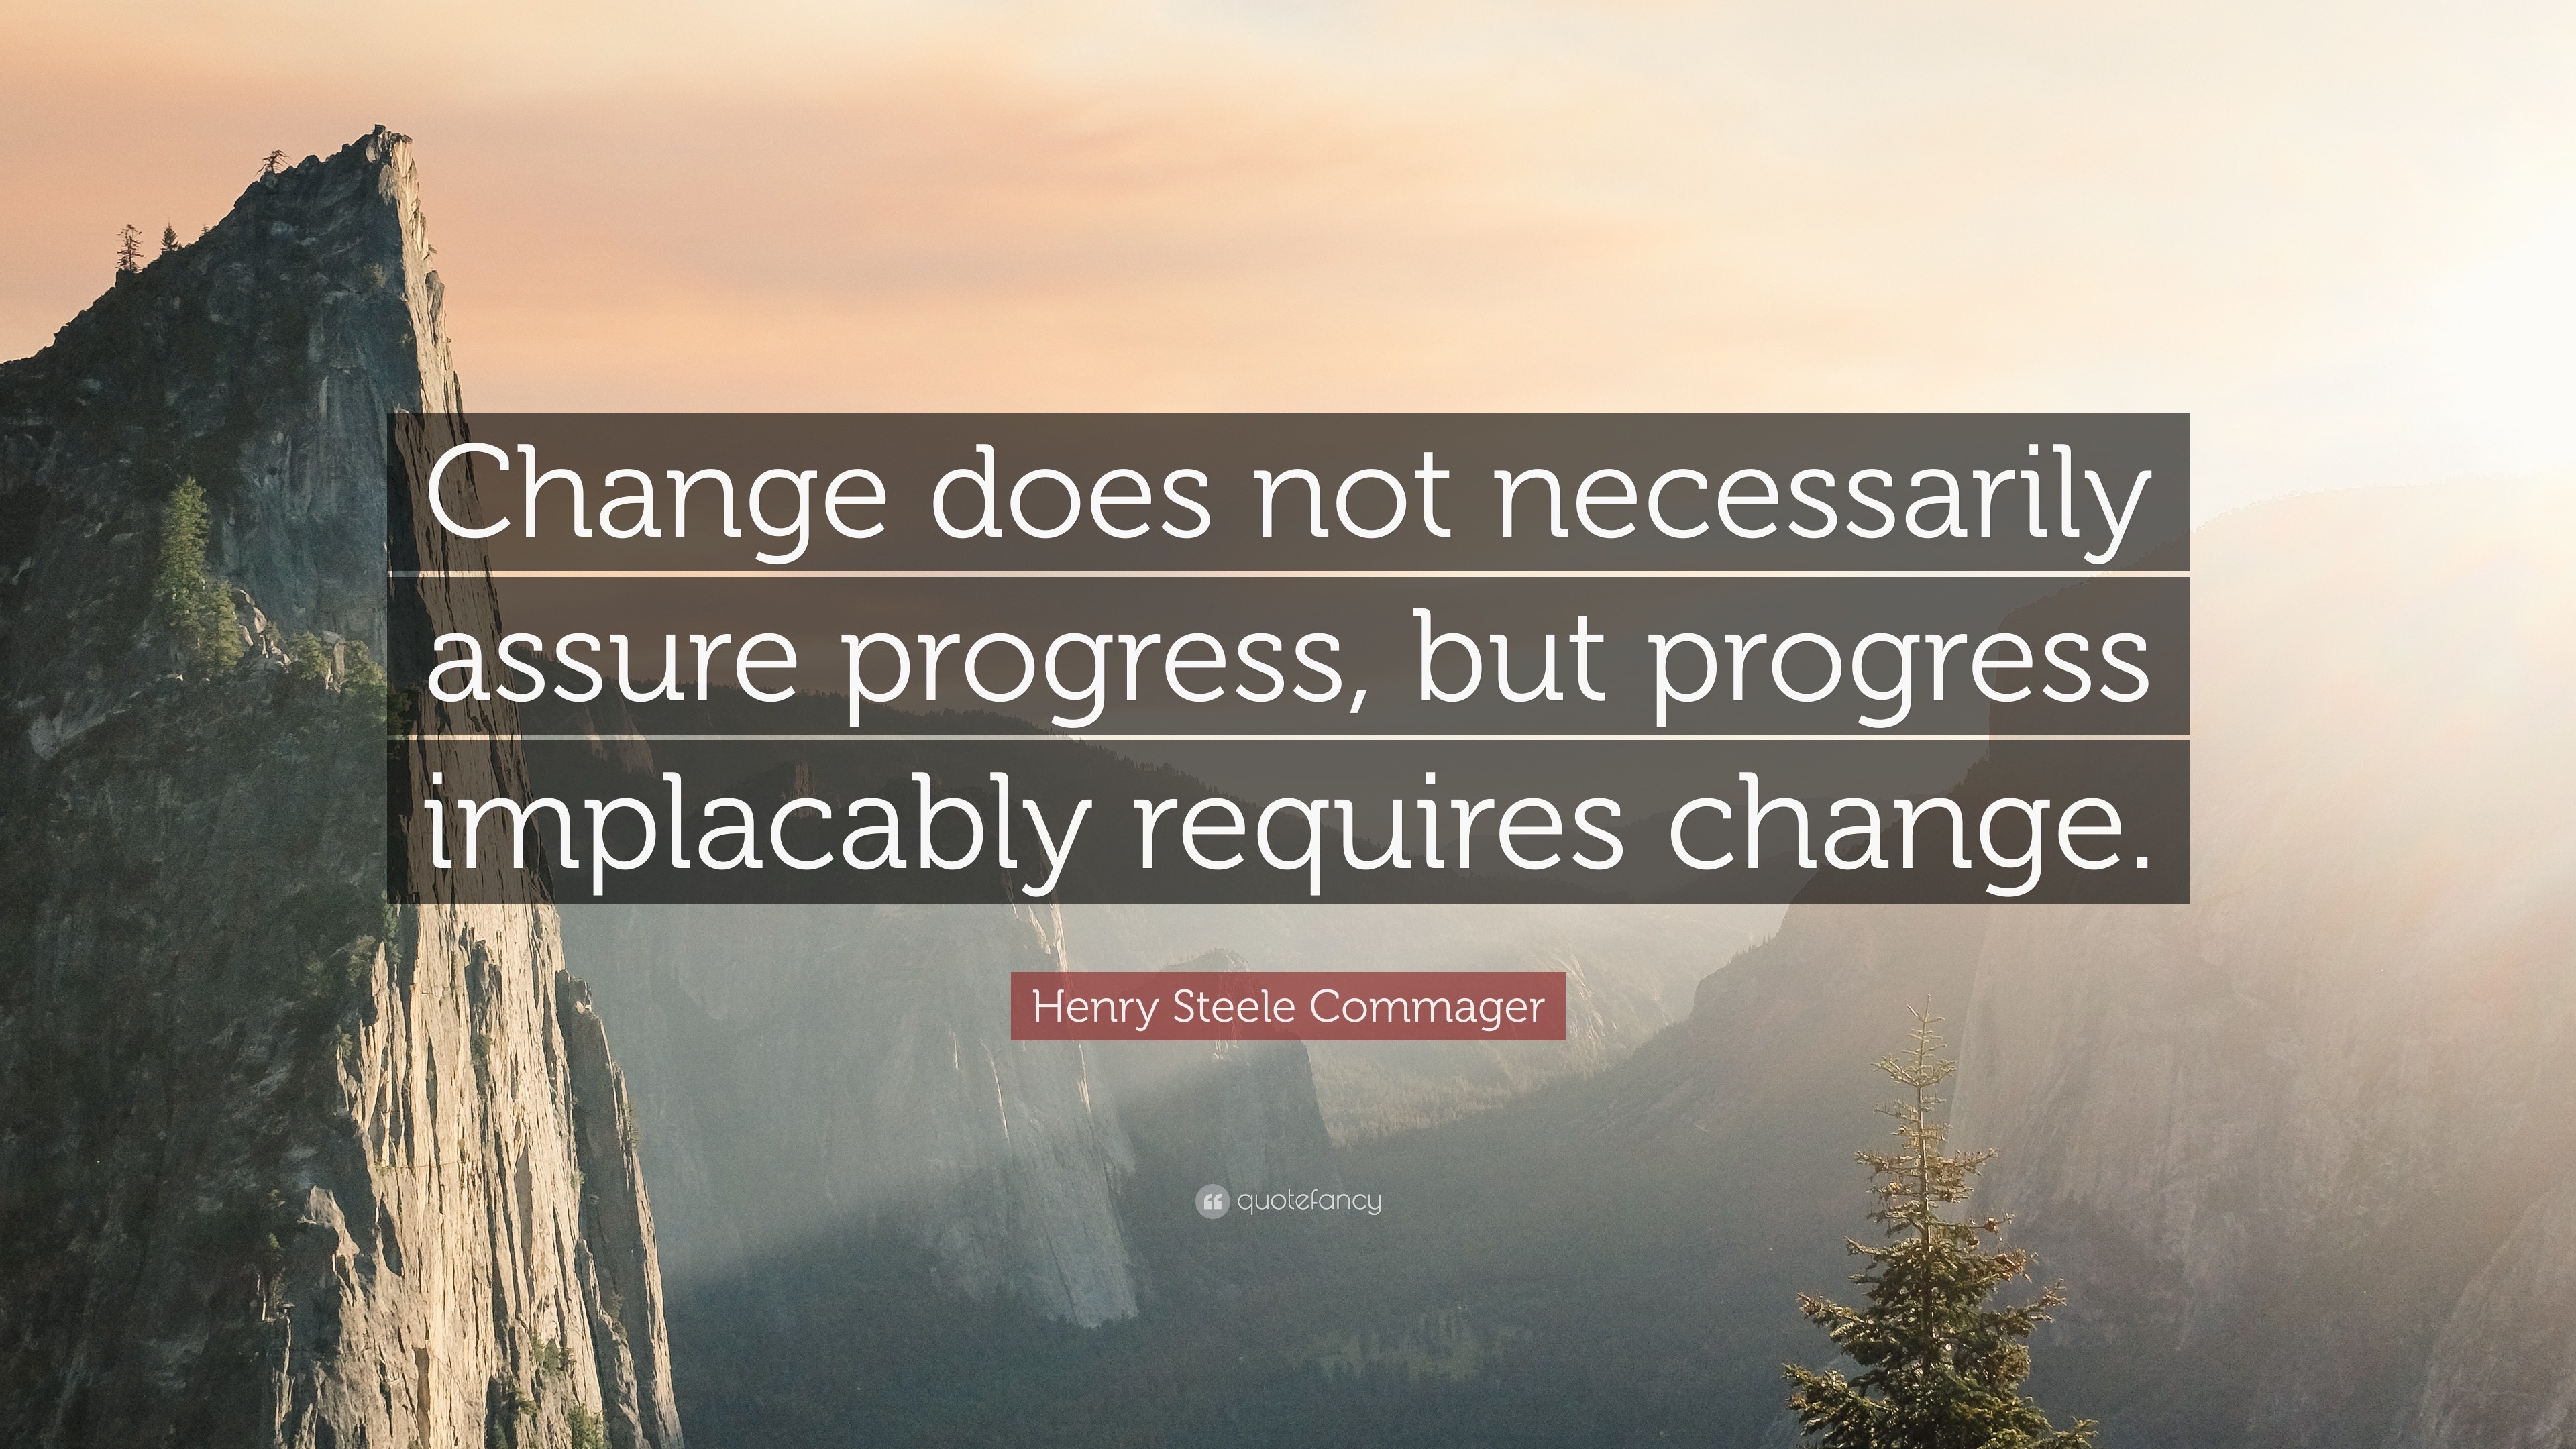 Henry Steele Commager Quote “Change does not necessarily